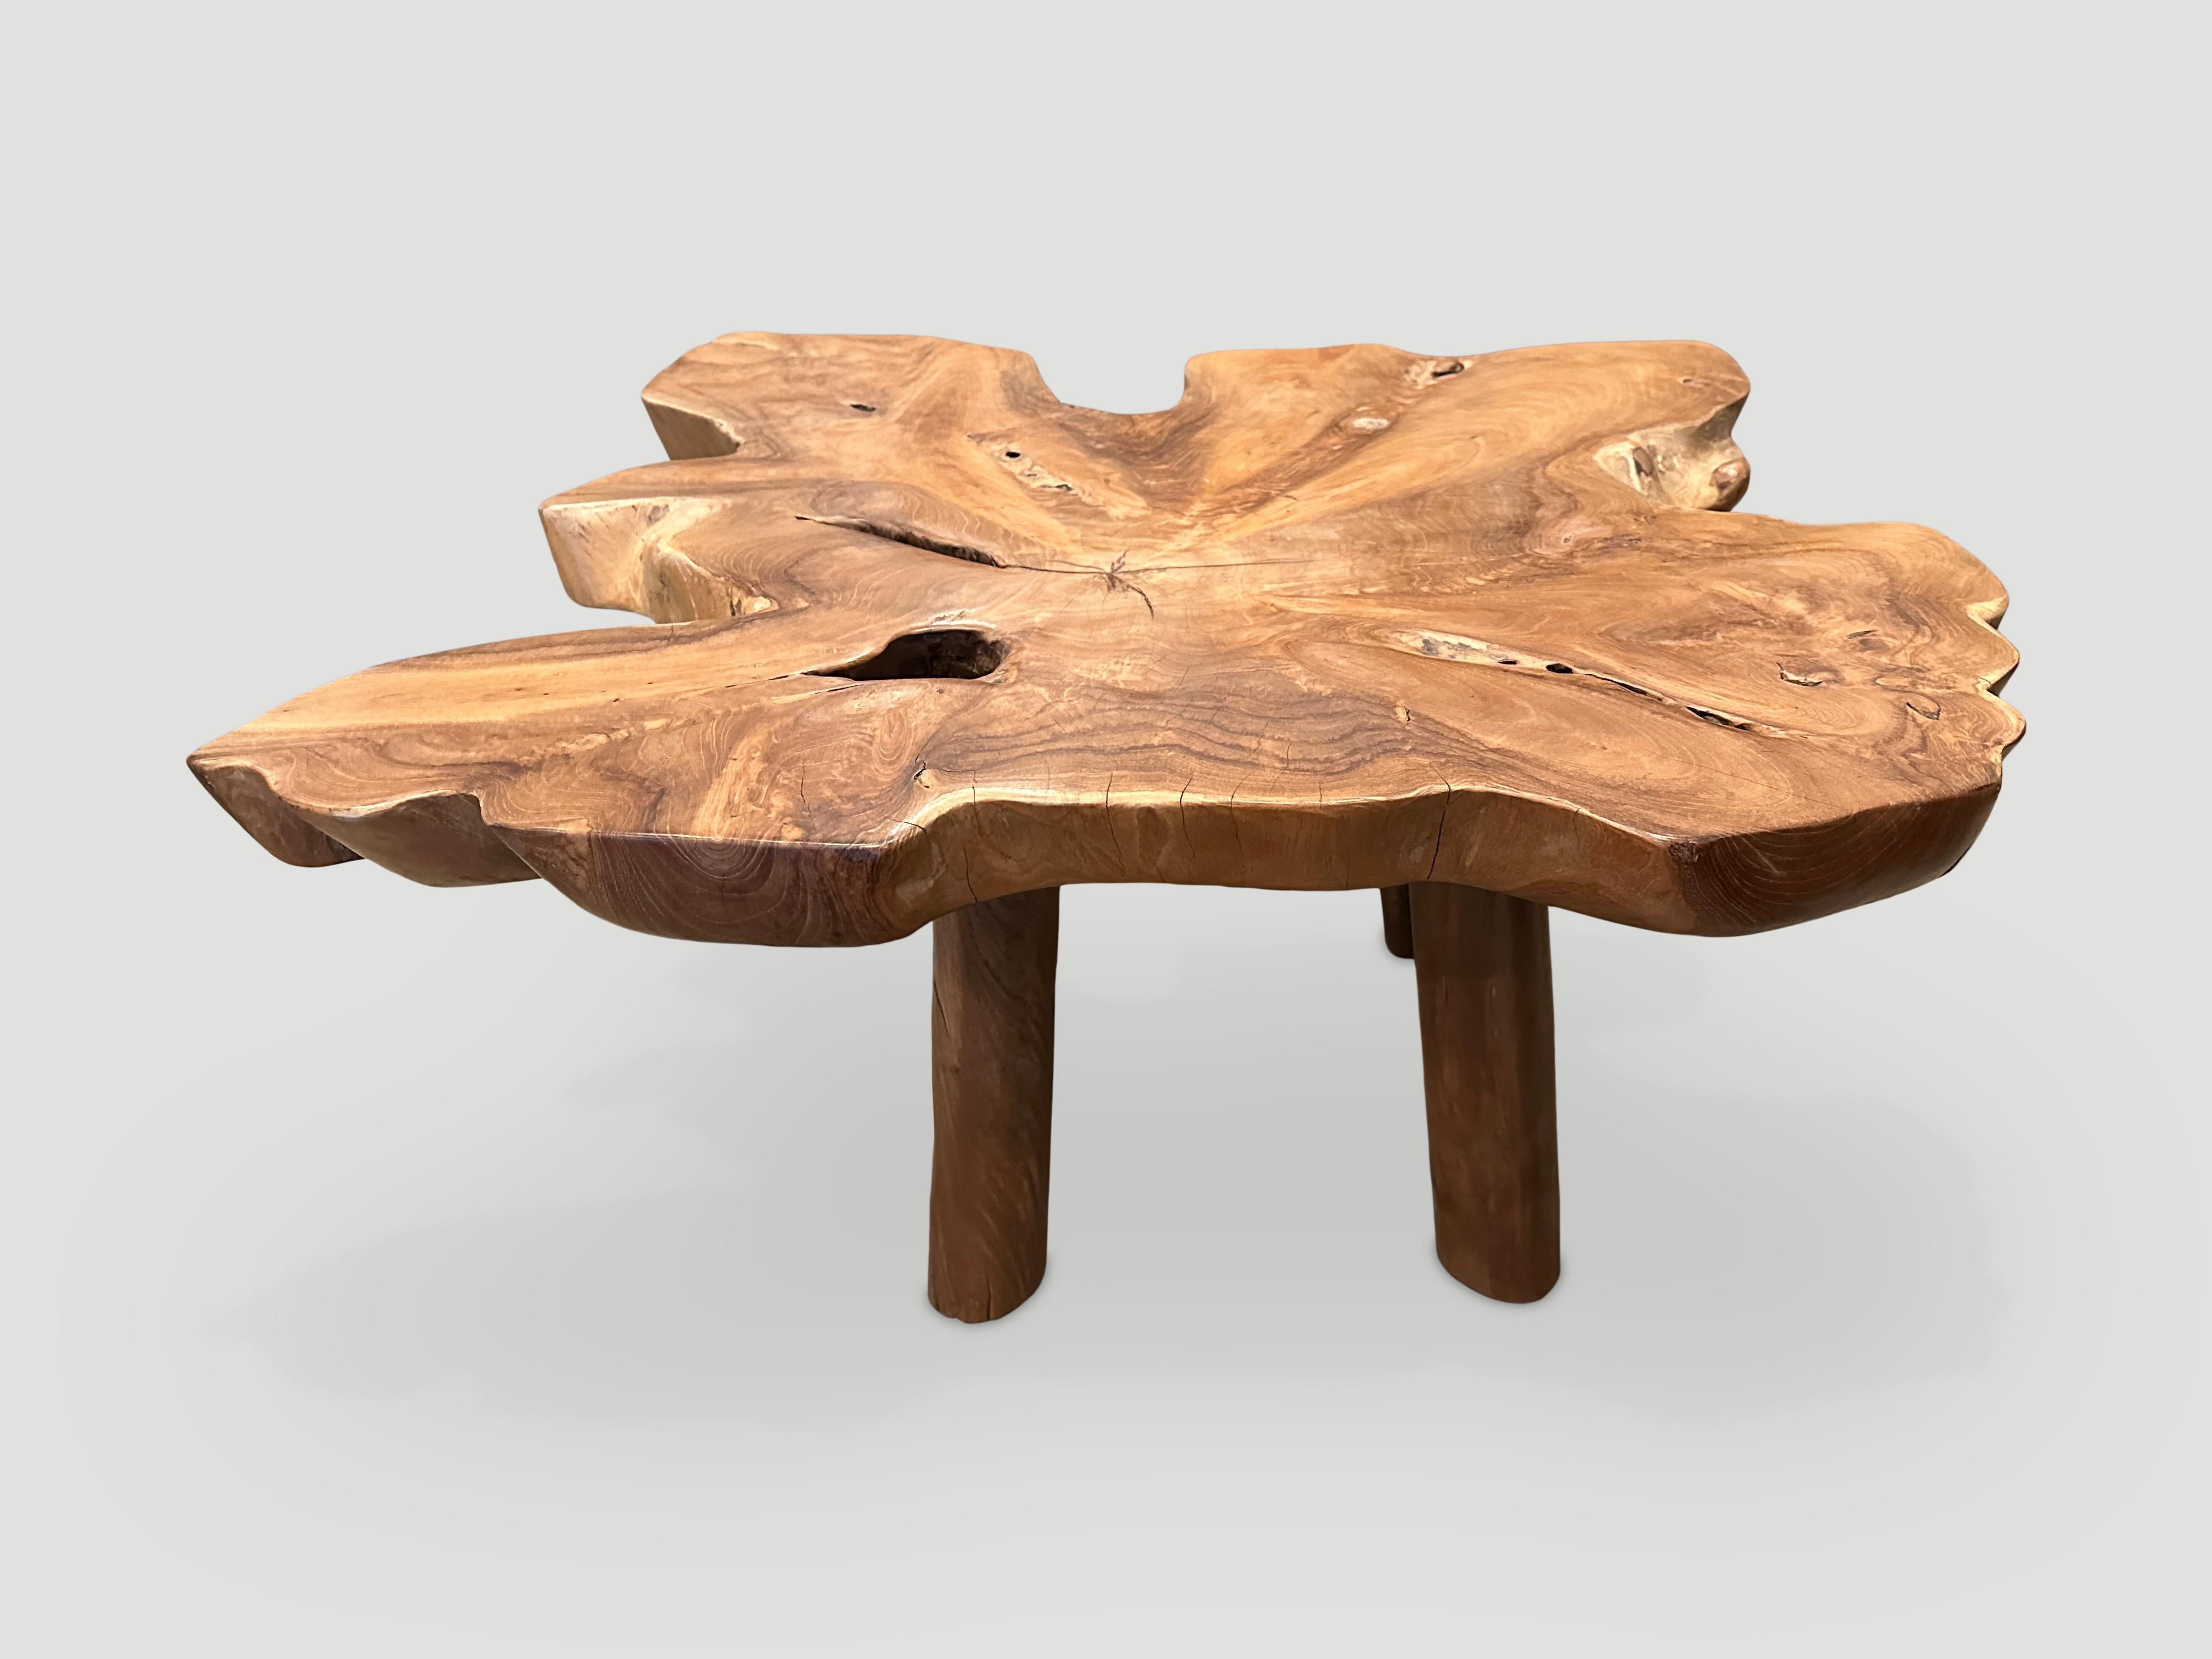 Single two inch slab live edged reclaimed teak wood coffee table. This beautiful shape is set on minimalist legs. Finished with a natural oil revealing the beautiful wood grain.

Own an Andrianna Shamaris original.

Andrianna Shamaris. The